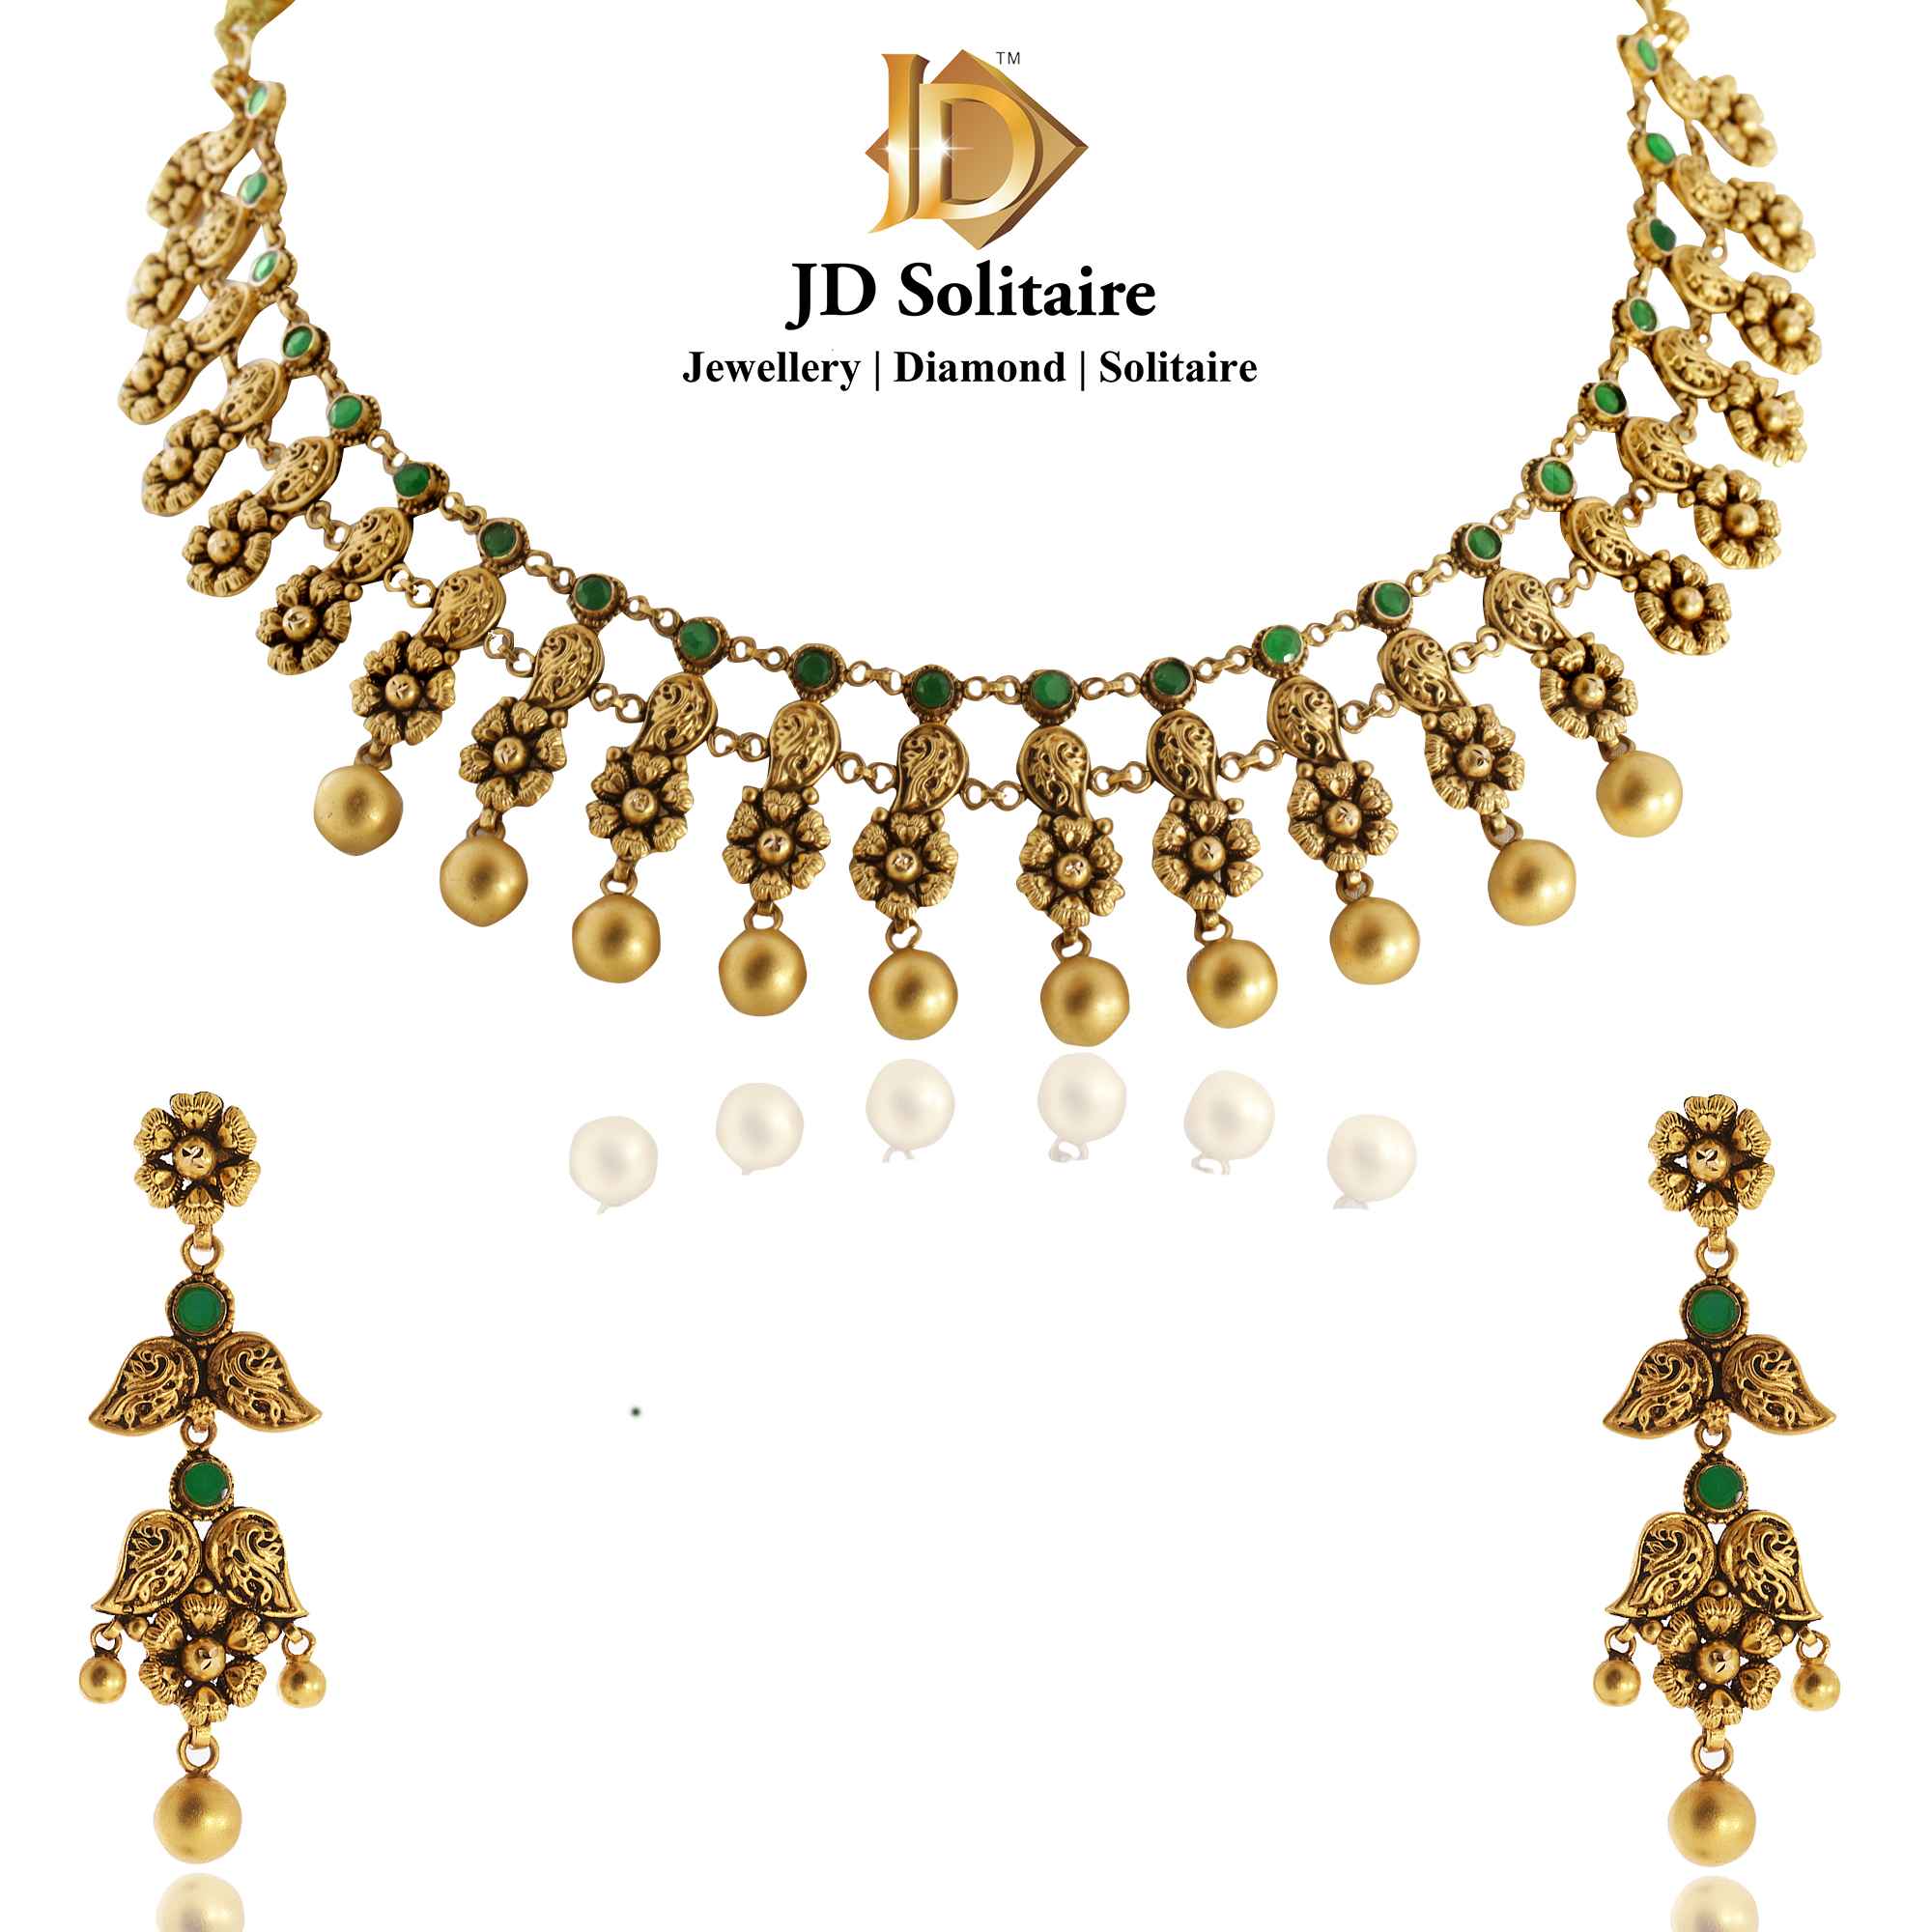 Antique Gold Necklace Designs In 22kt - JD SOLITAIRE